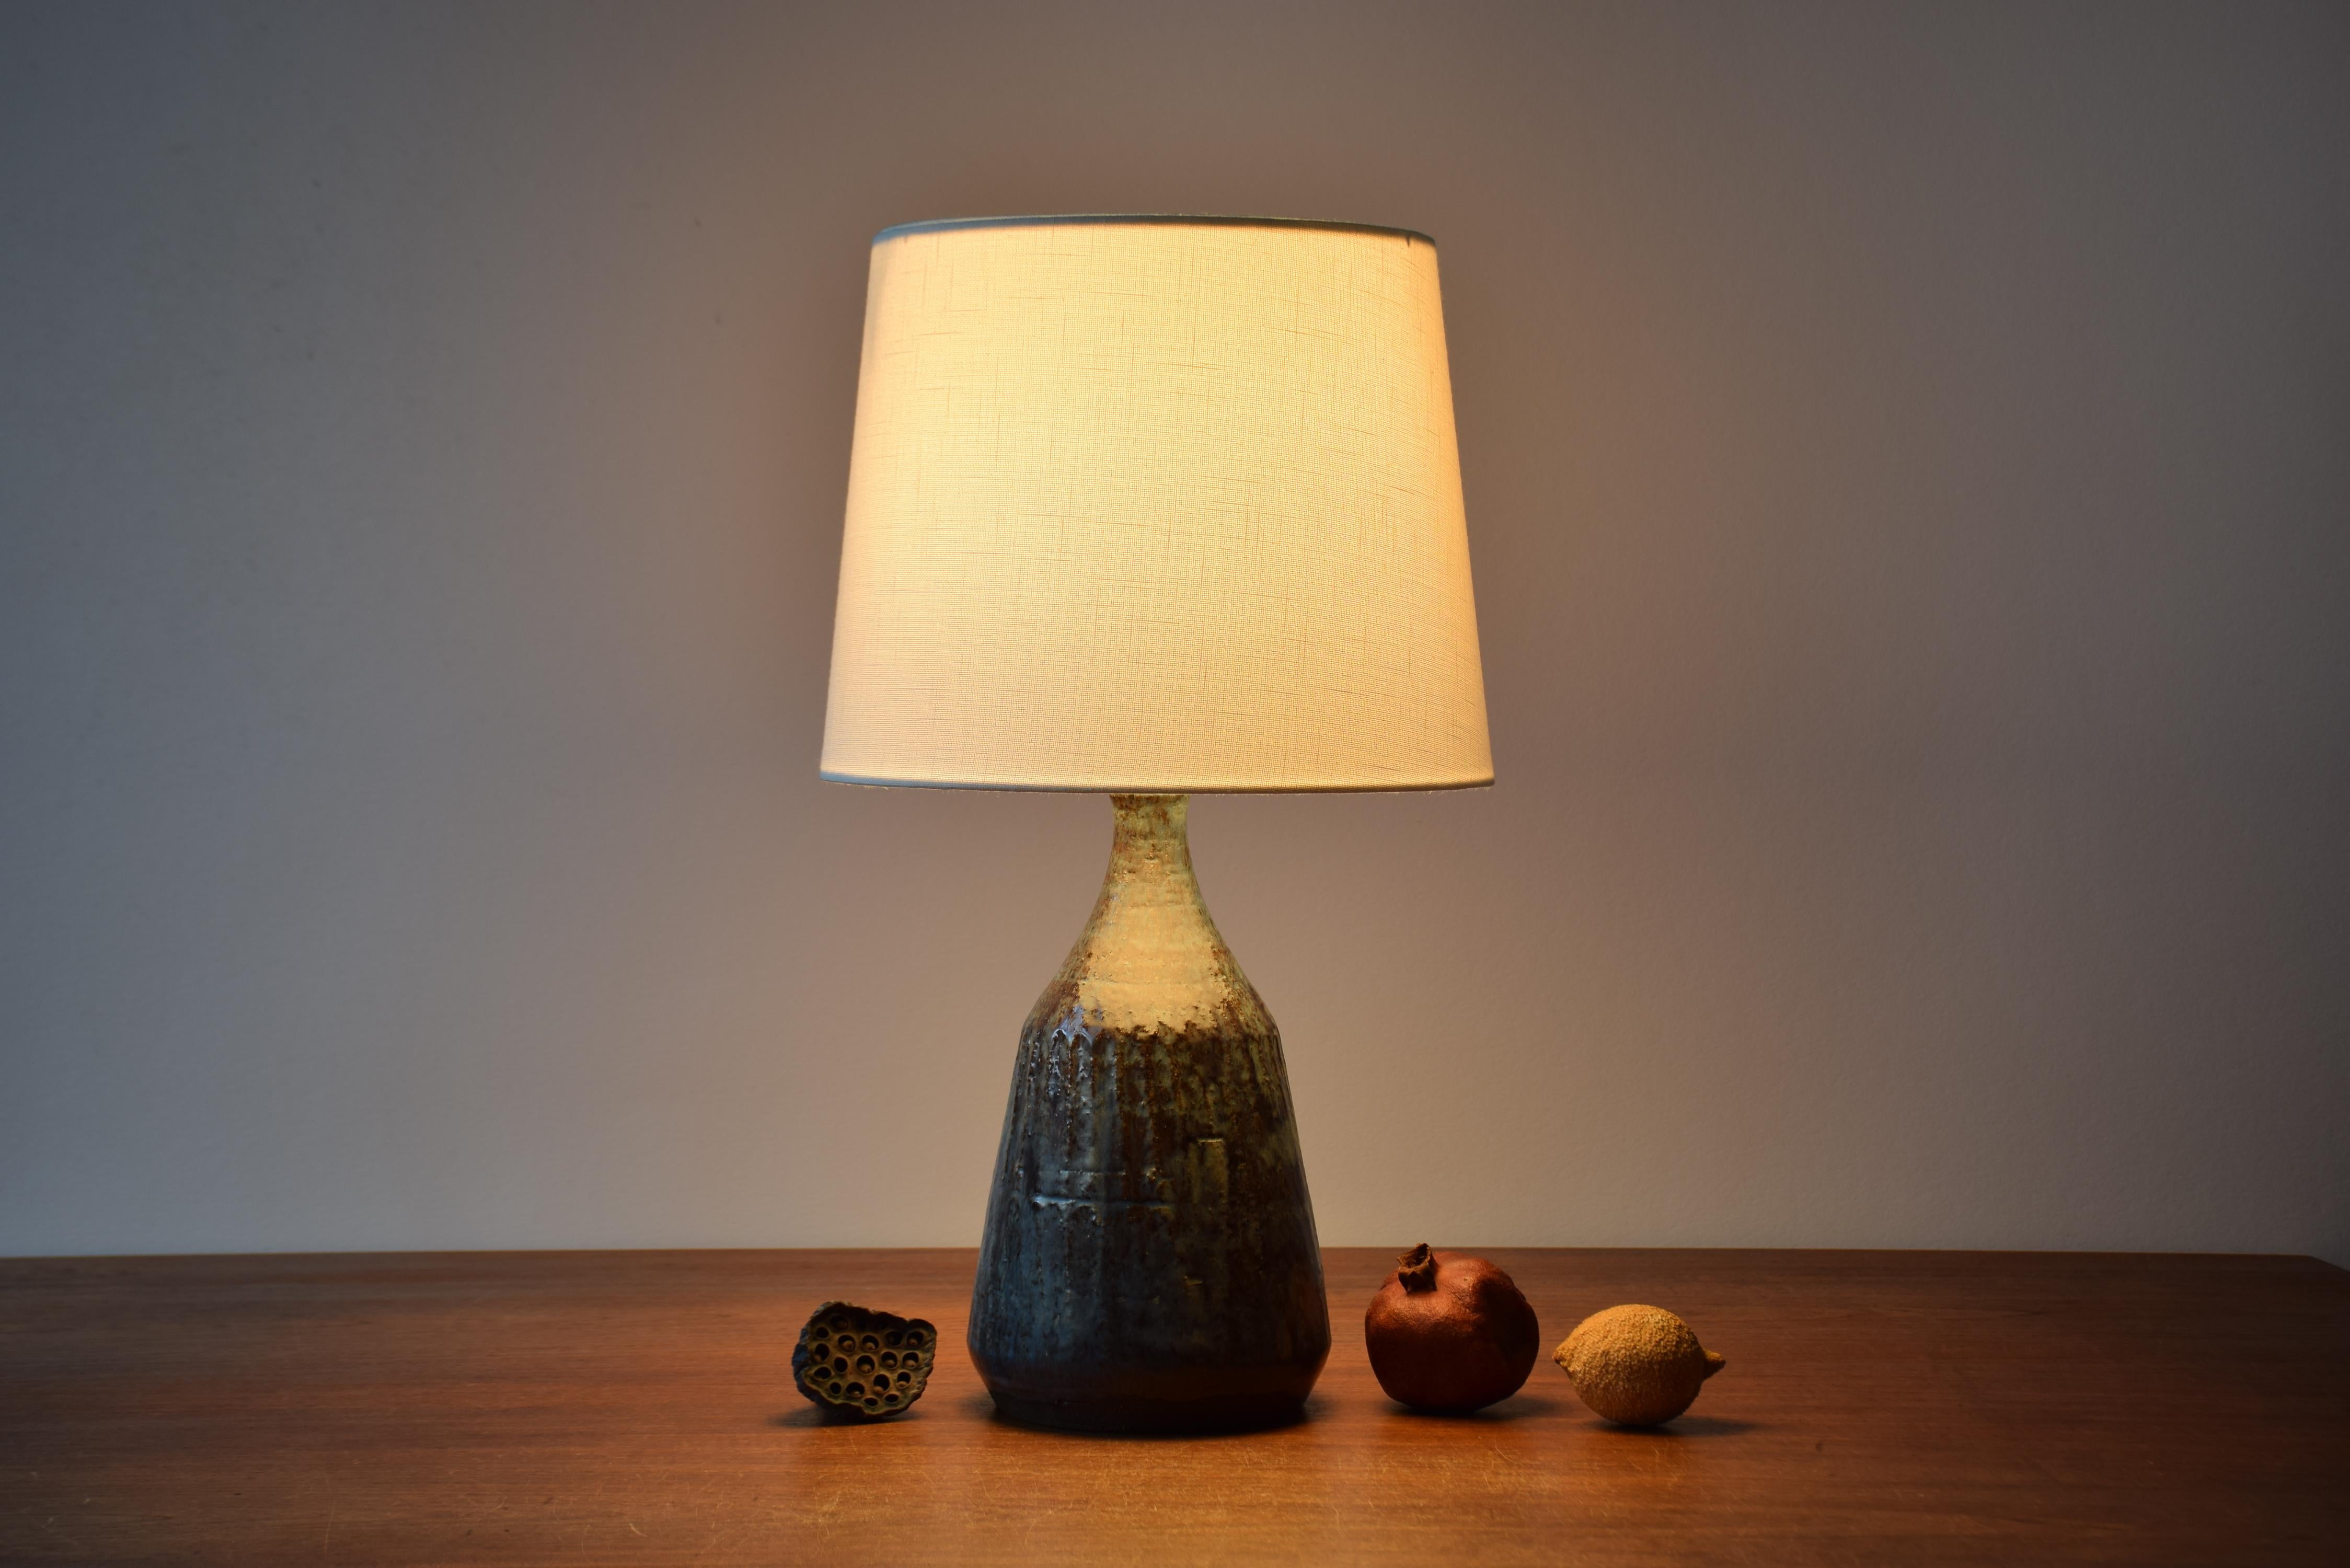 Danish Ceramic Table Lamp Blue and Brown Glaze Bamboo Shade, Modern, 1960s For Sale 8